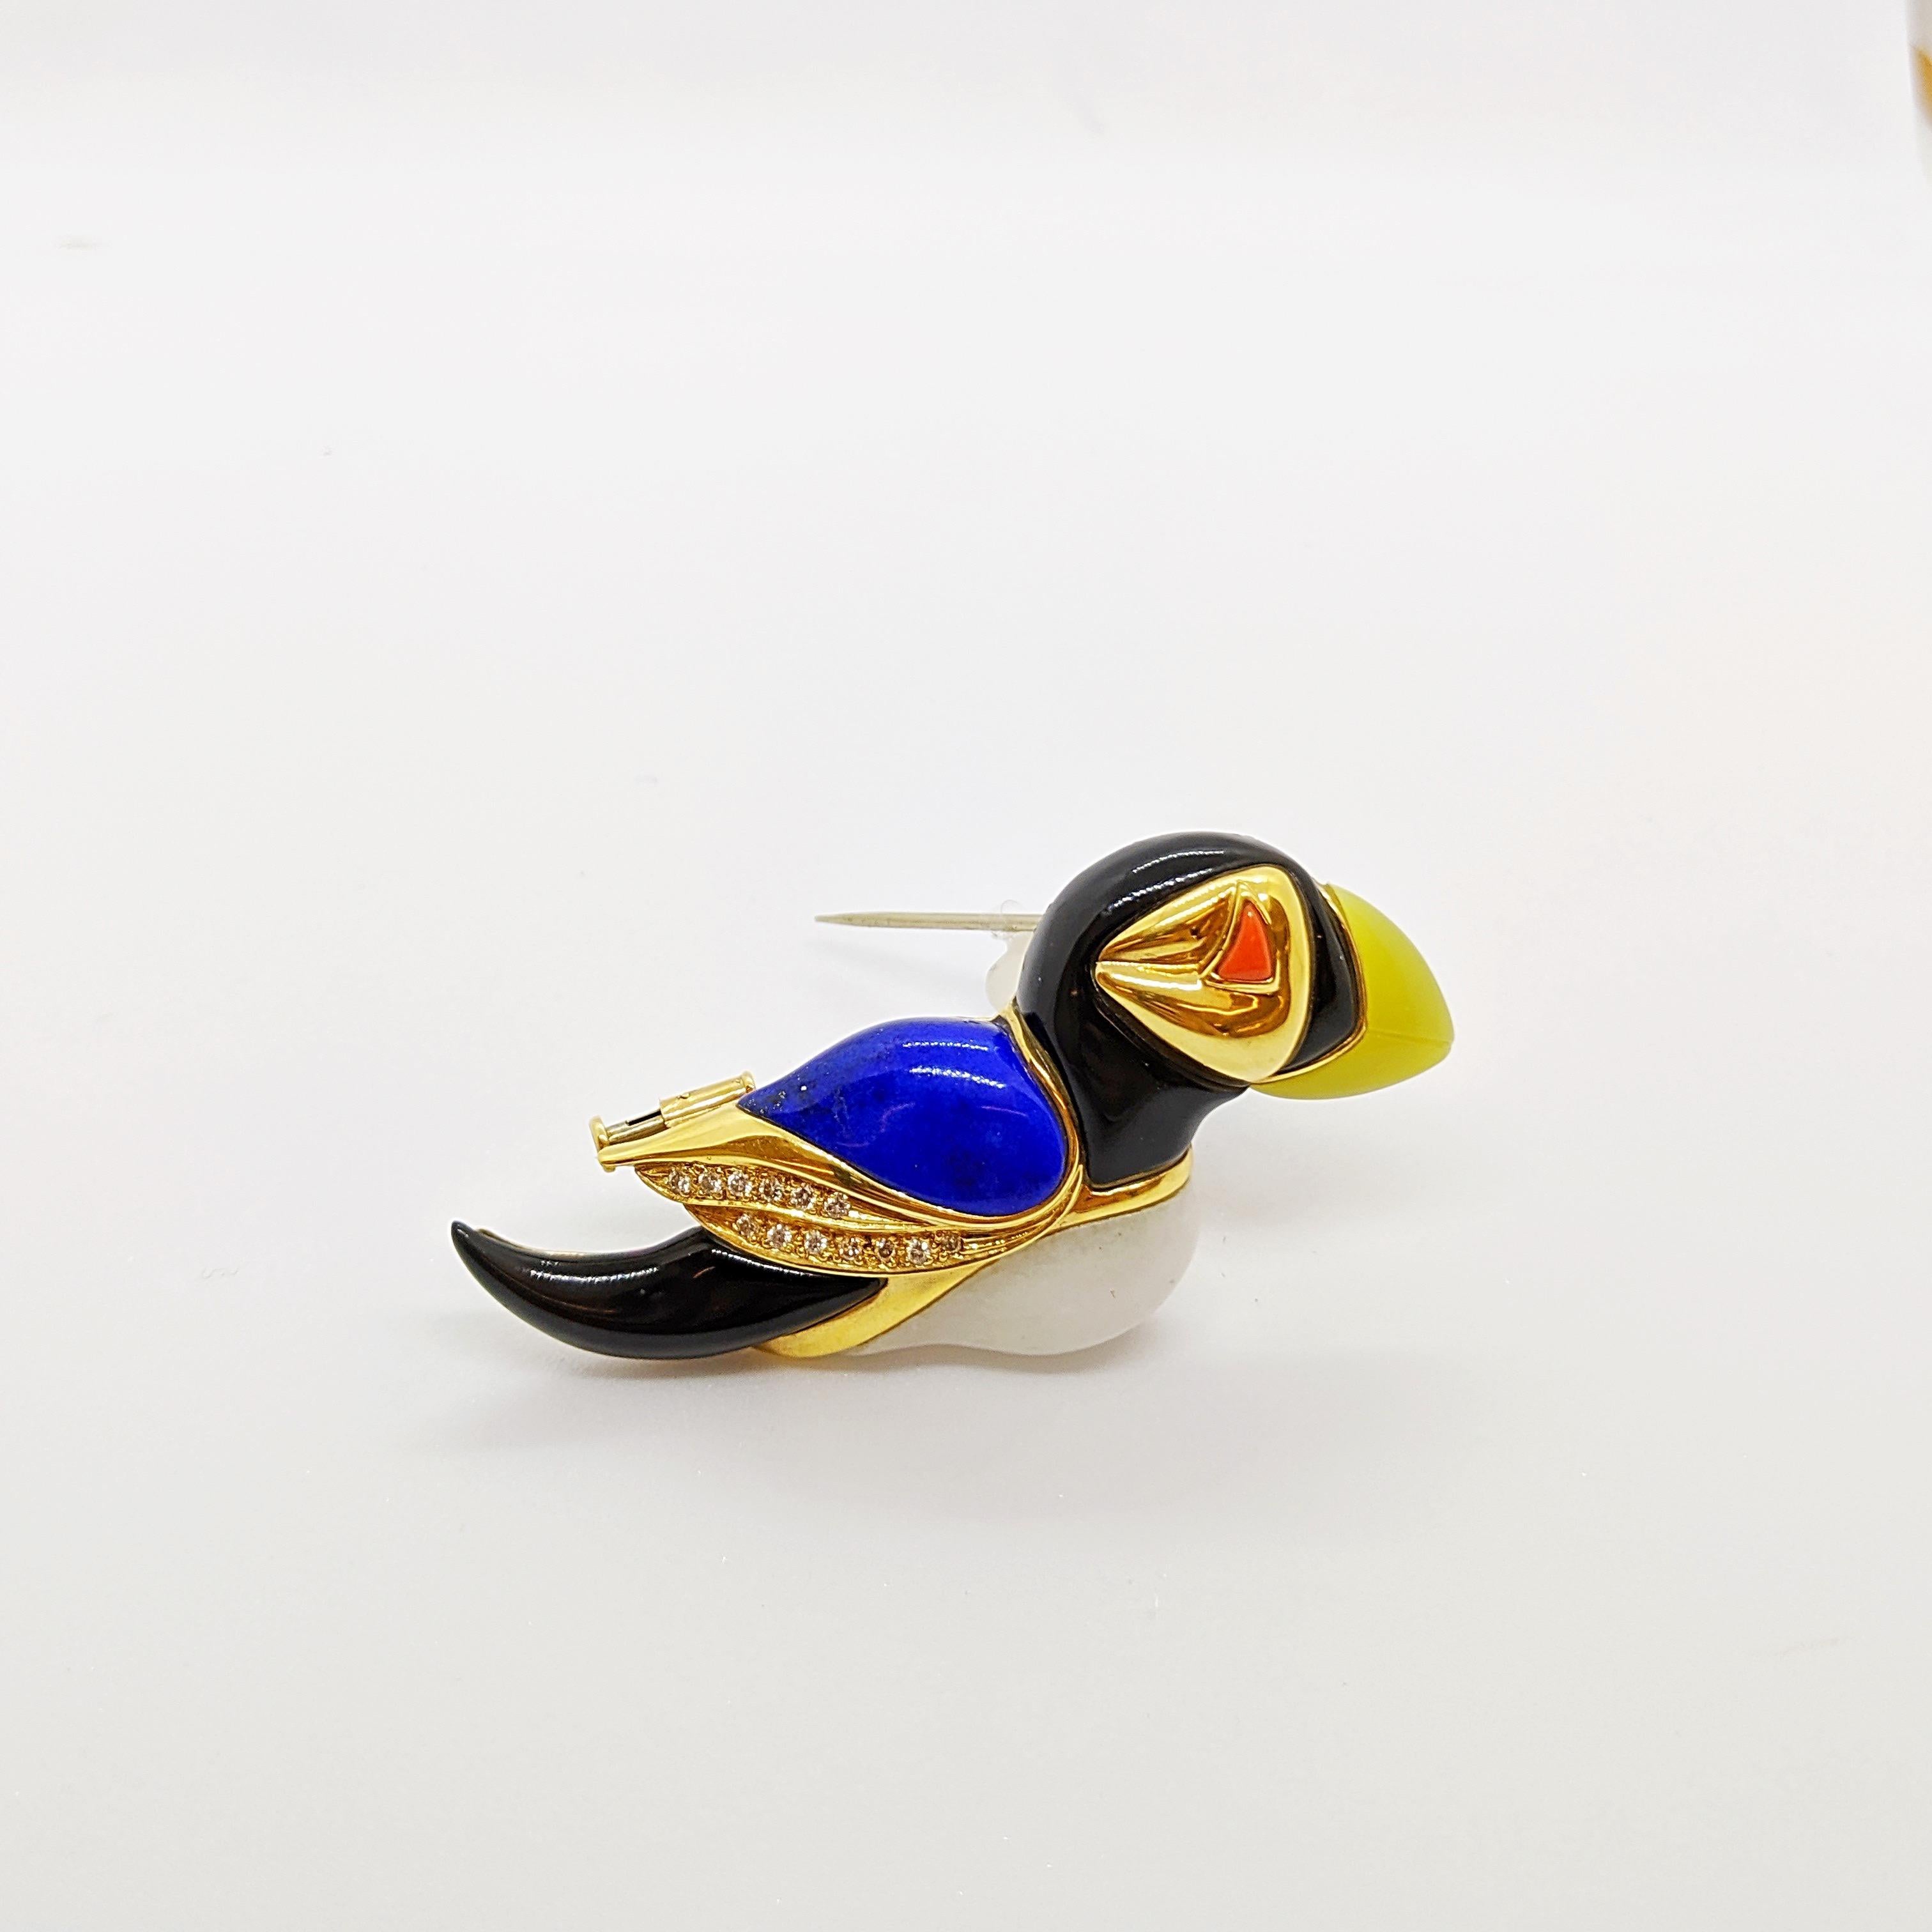 A true work of craftsmanship is the best way to describe this Puffin brooch. Smooth and hand polished stones of Jasper, Lemon Agate, Onyx, and Lapis  form the sculptural birds body. White round brilliant diamonds weighing 0.14 carats are set in the